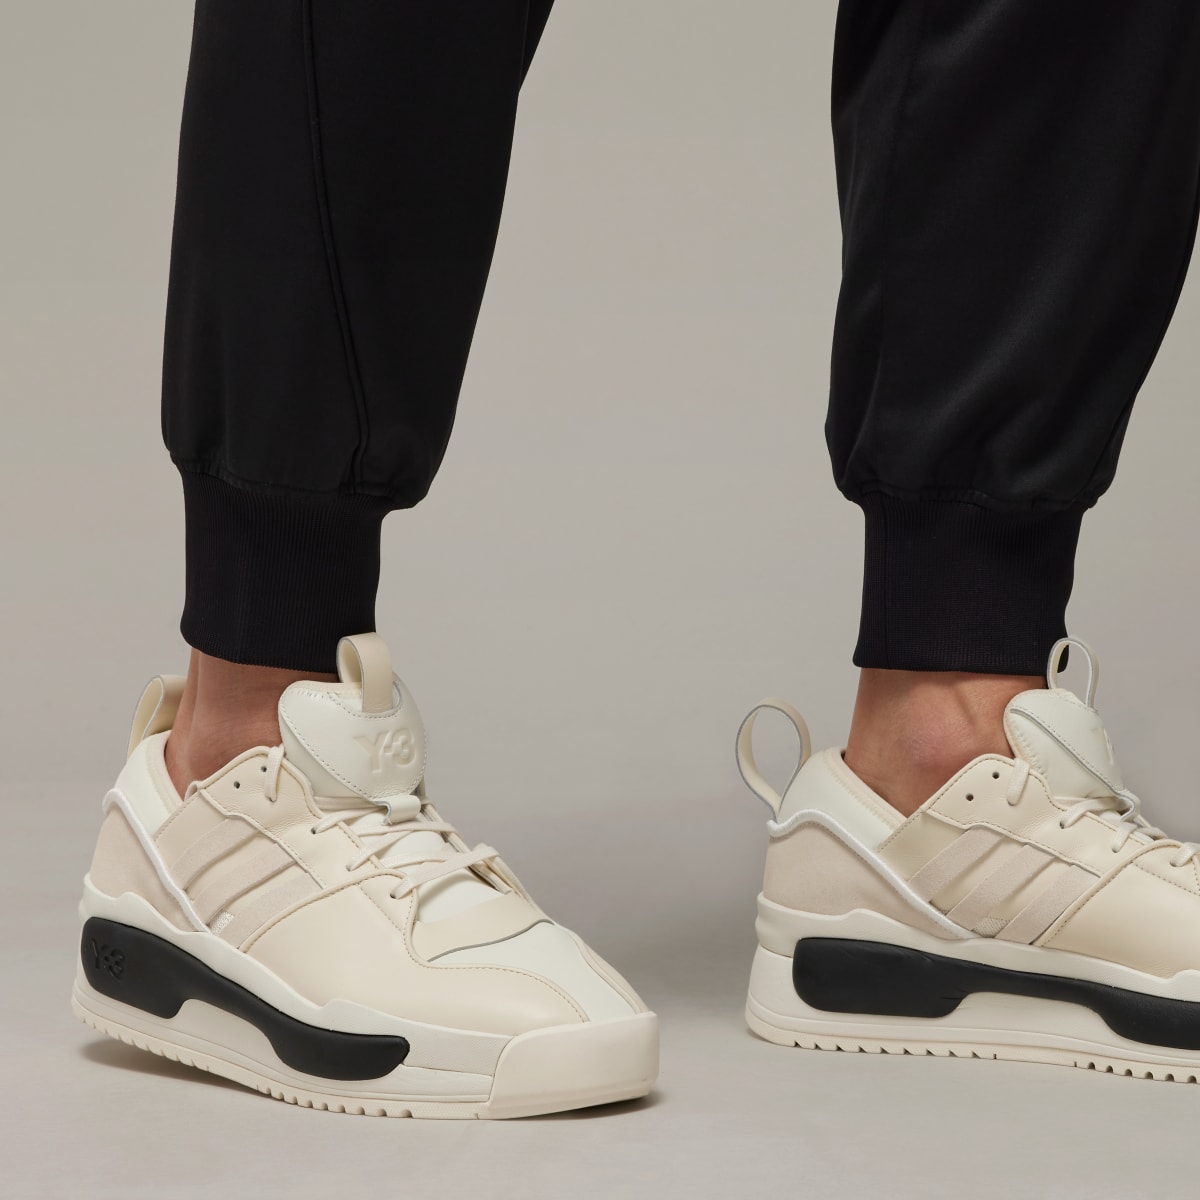 Adidas Y-3 Refined Woven Cuffed Tracksuit Bottoms. 8